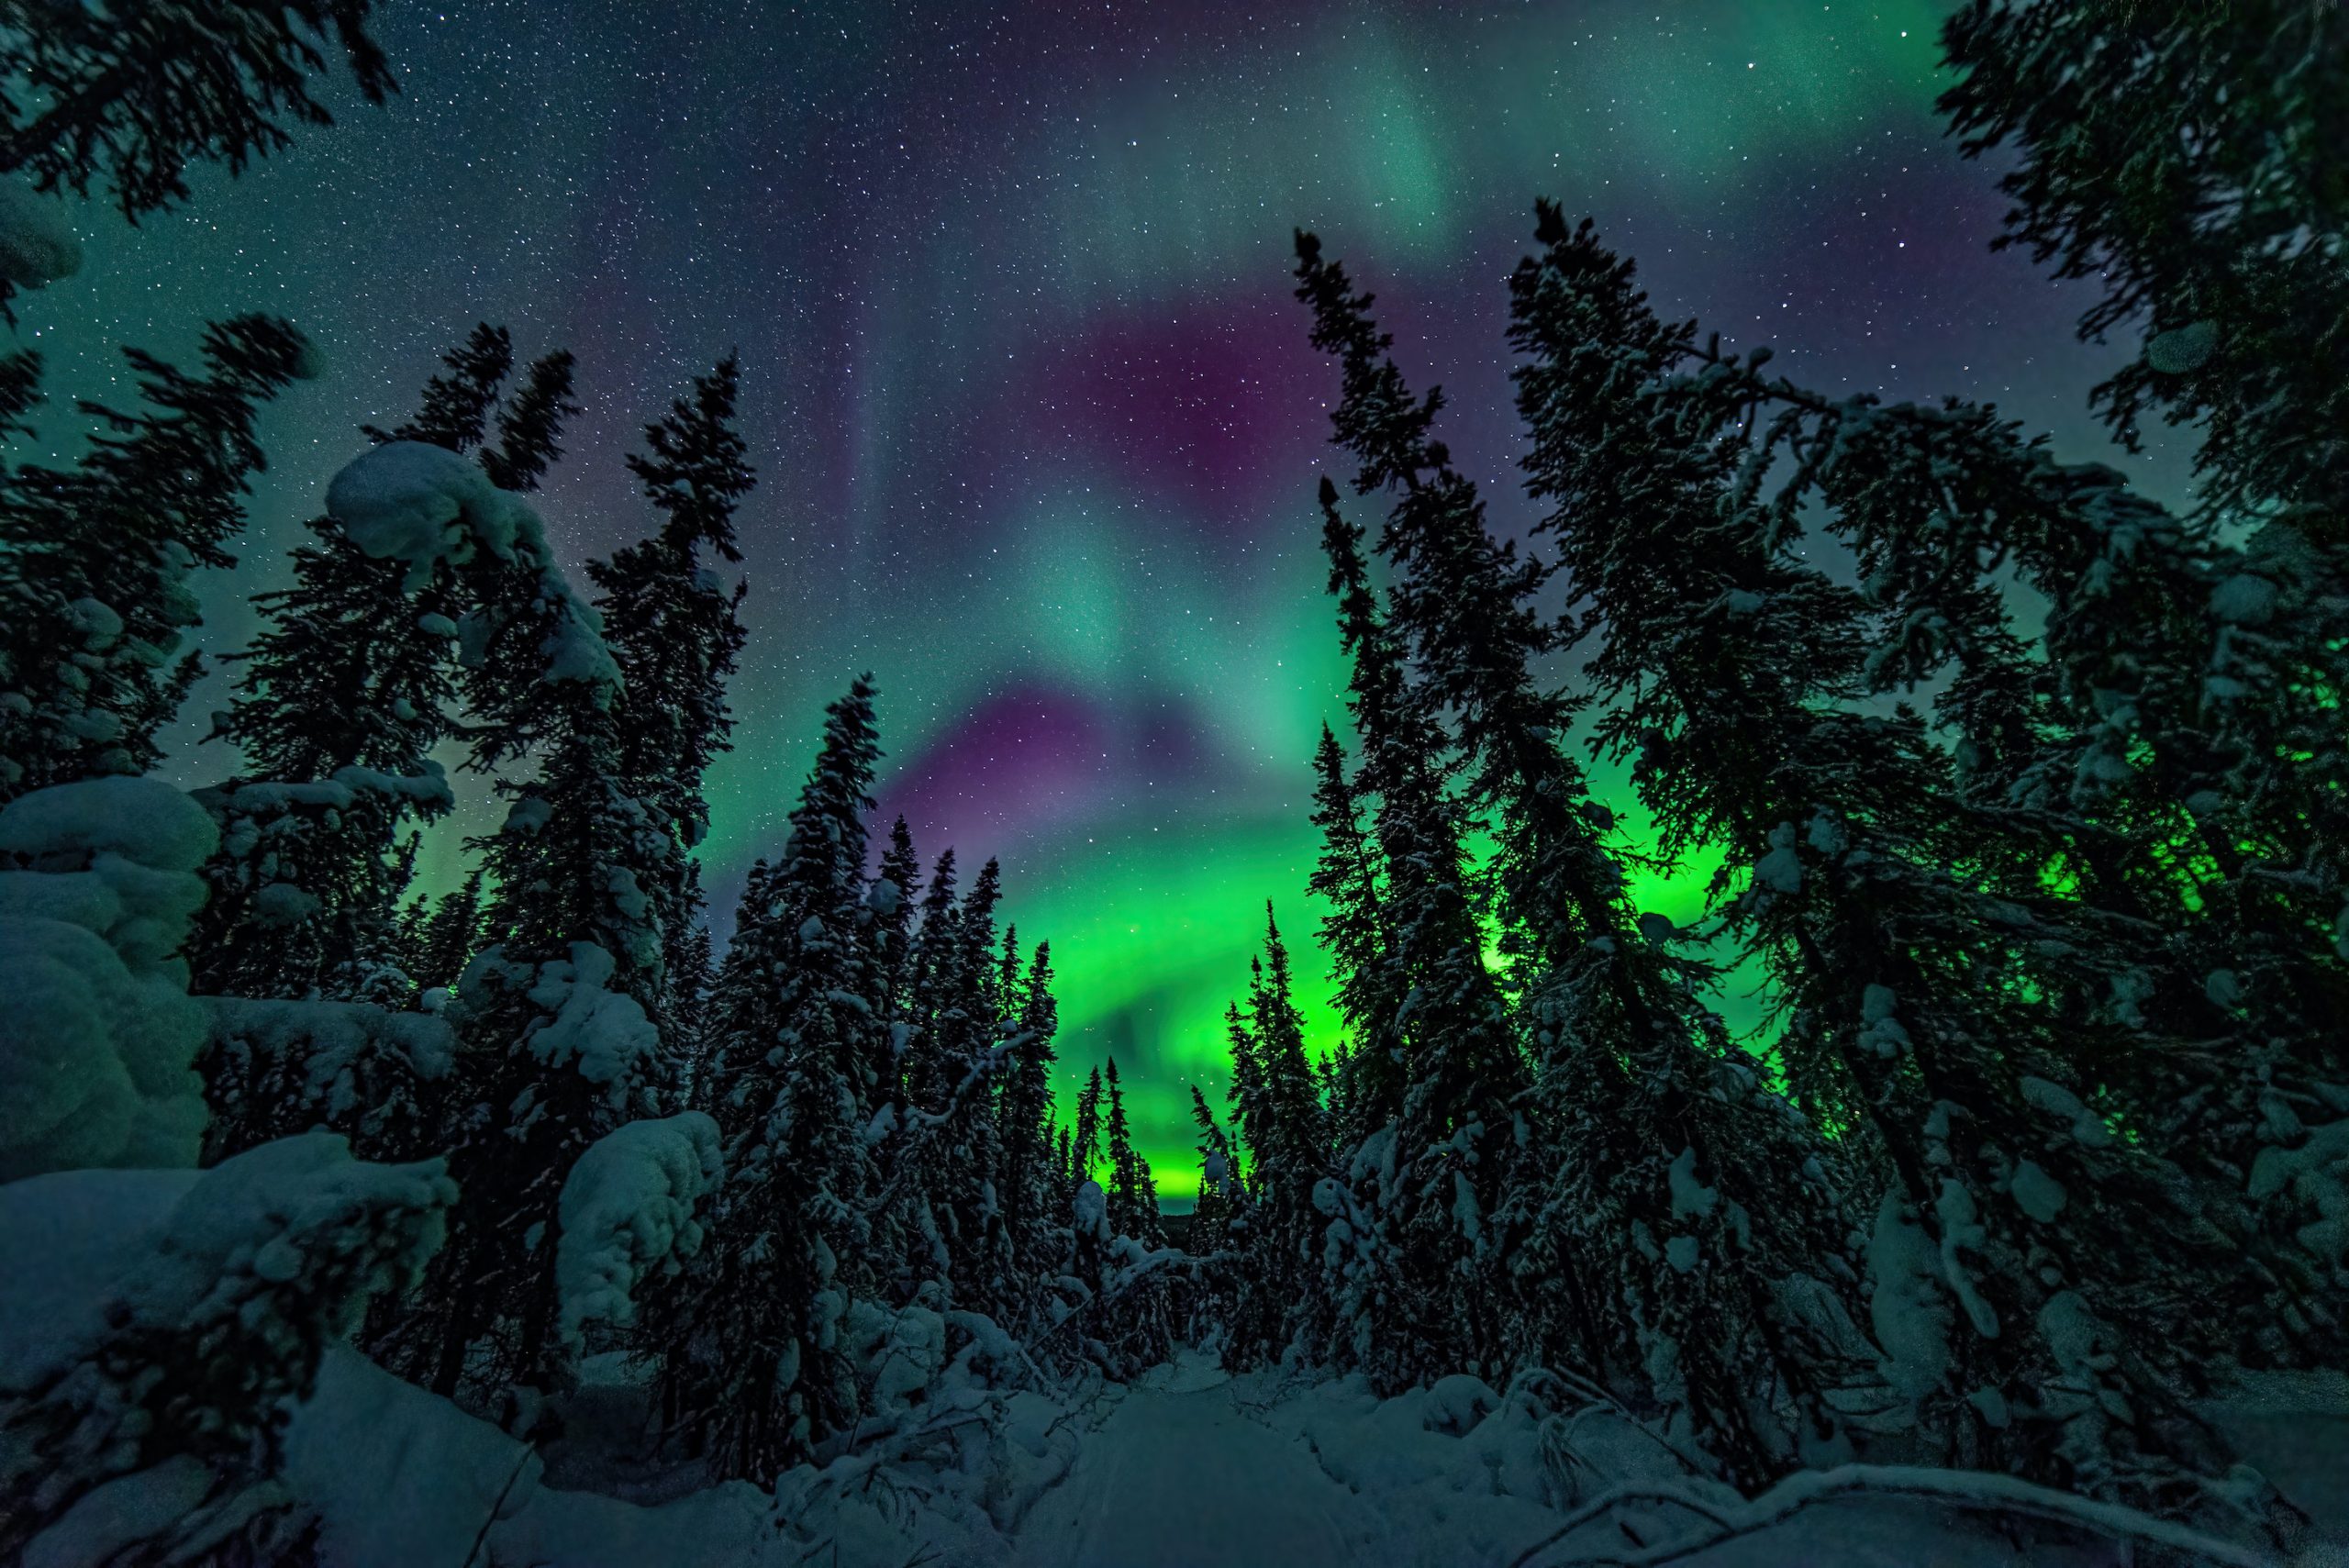 path through snow, surrounded by spruce trees, green and purple northern lights swirling in sky